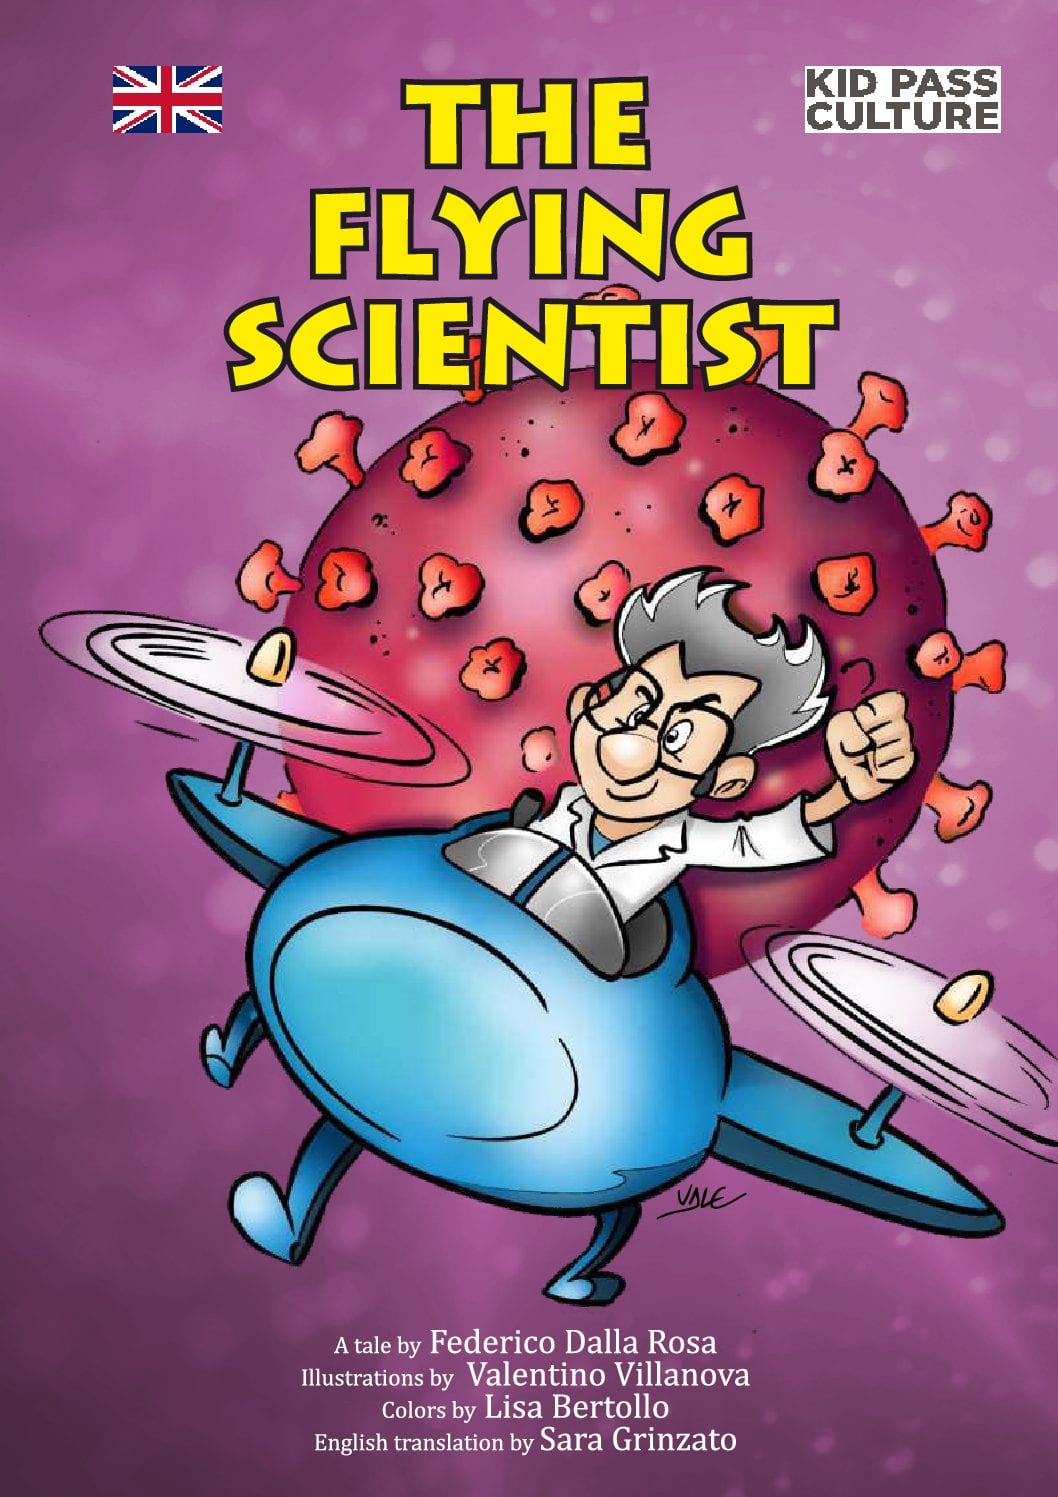 The Flying Scientist (A Children's Educational Book About COVID-19)